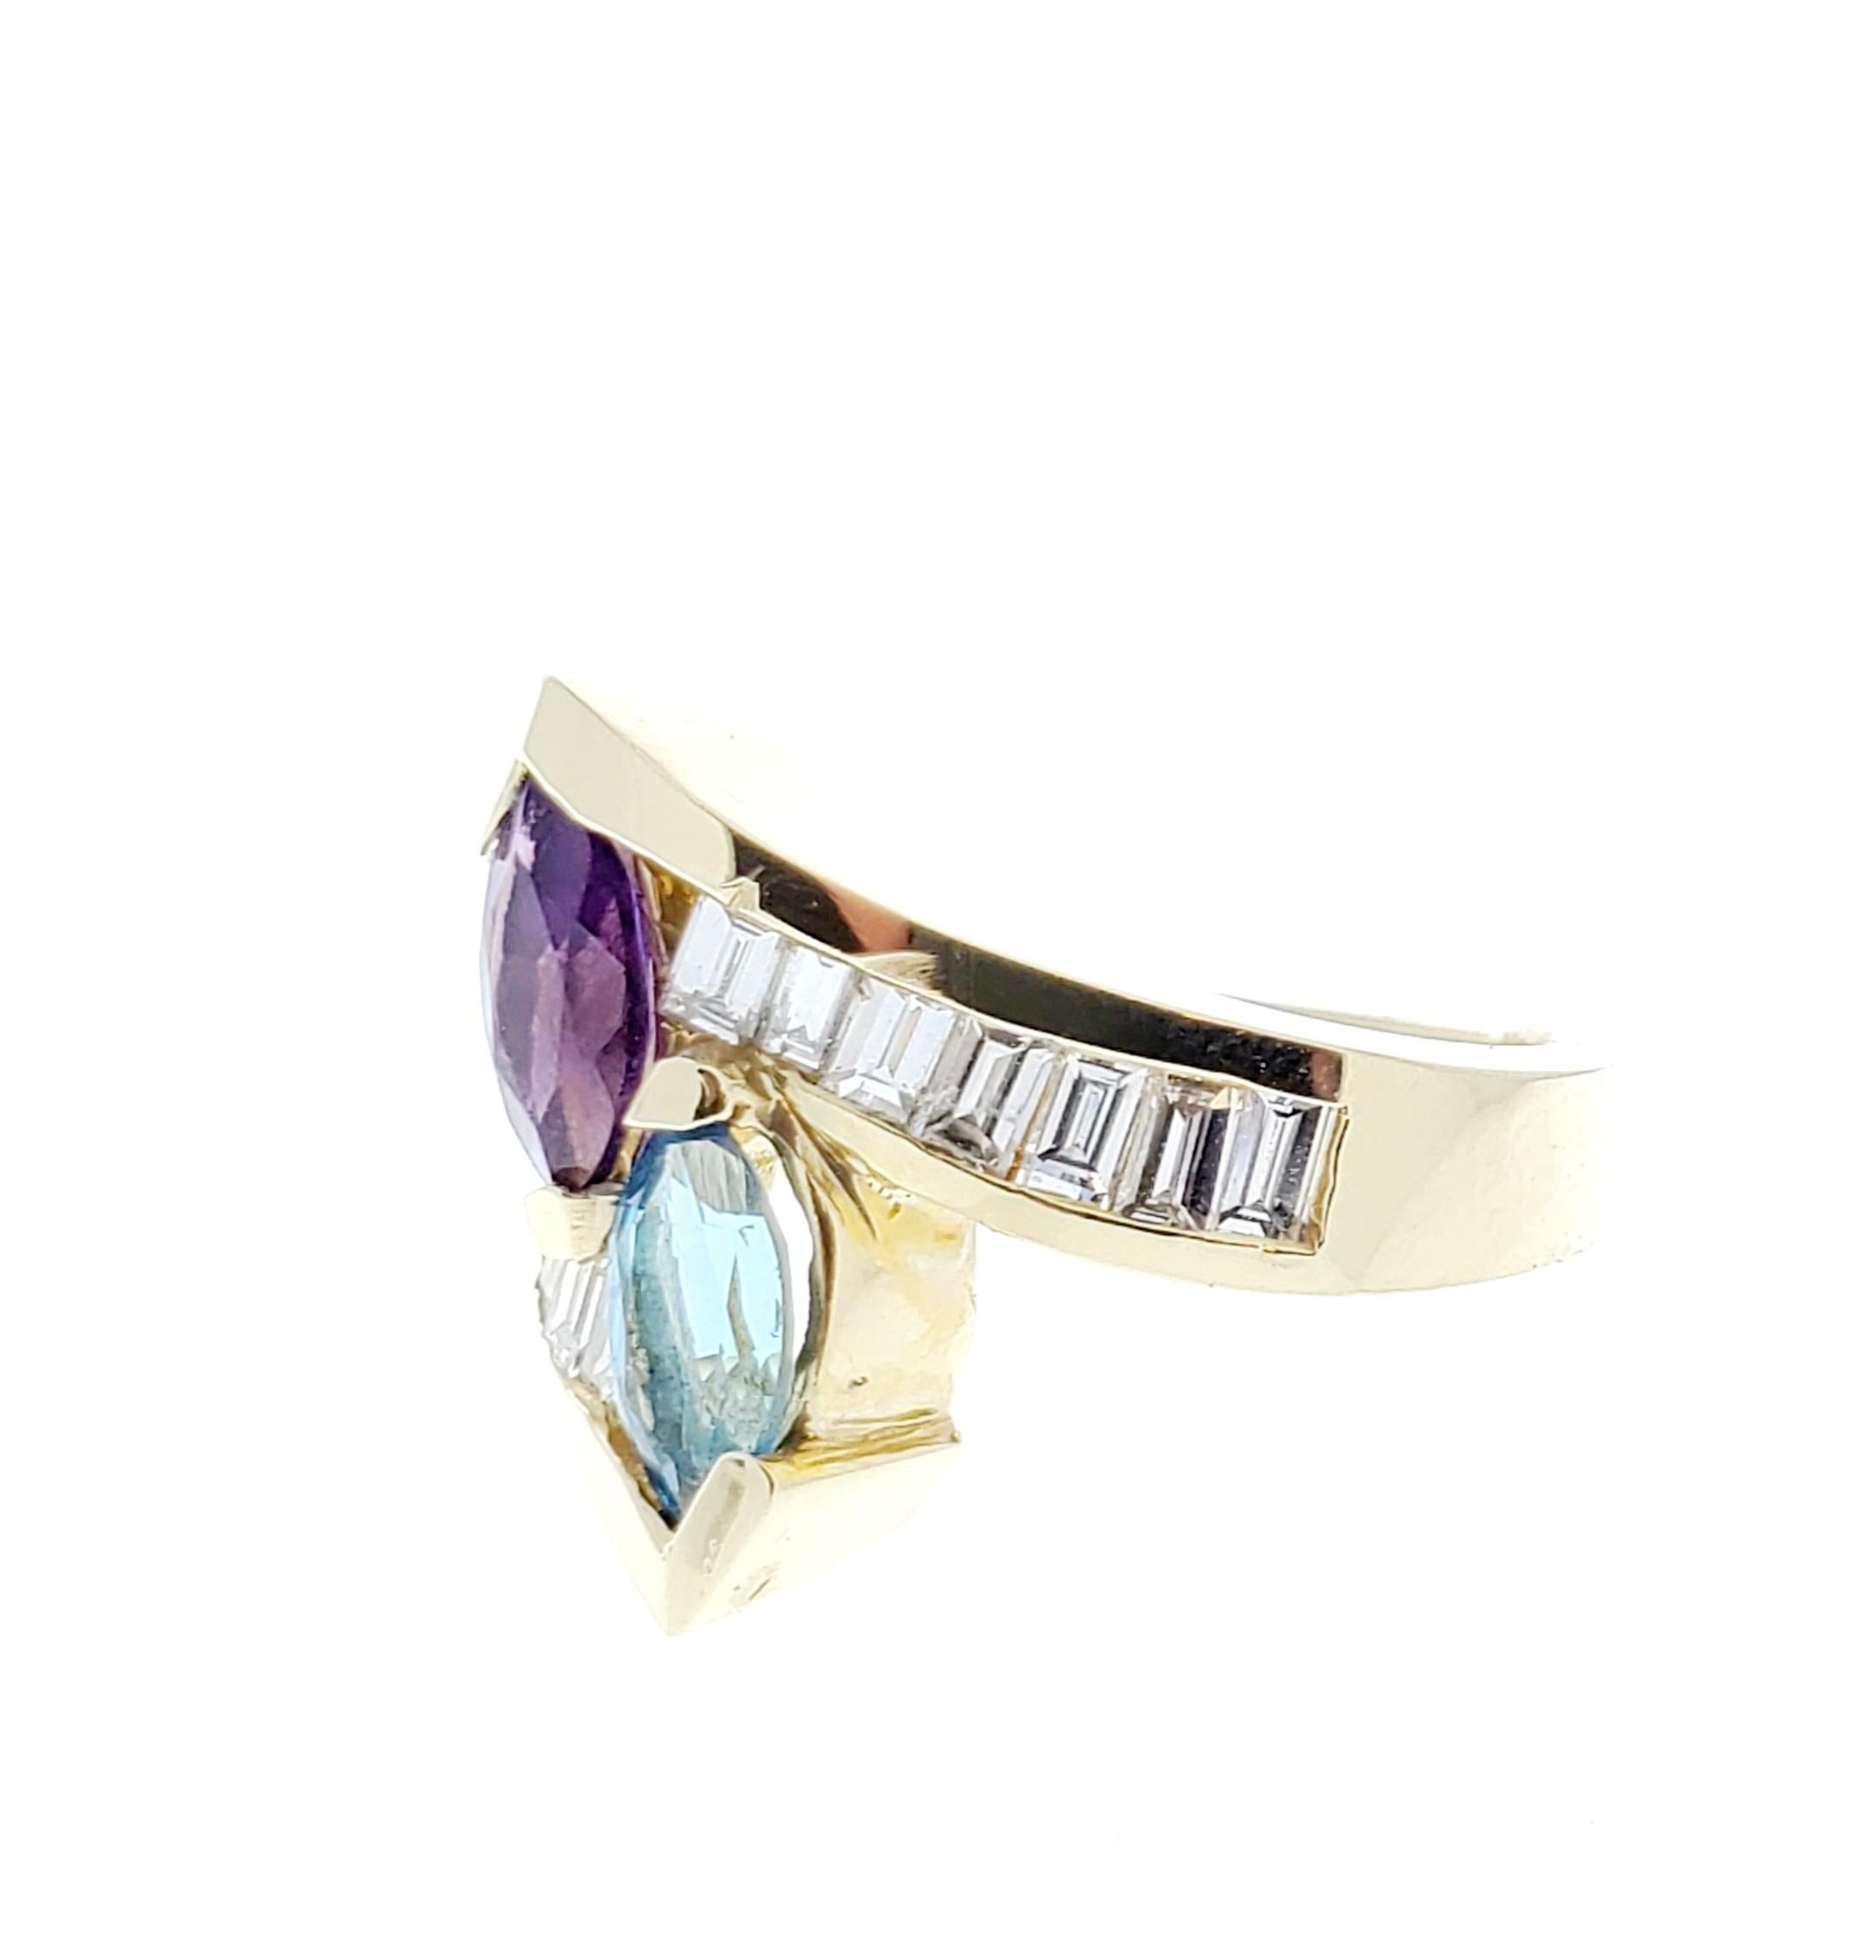 This gorgeous 14 karat yellow gold gemstone cocktail ring features one marquise cut blue topaz and one marquise cut amethyst prong set in the center of this sweeping bypass design, totaling 1.40 carats, and displaying incredible vibrancy. A total of